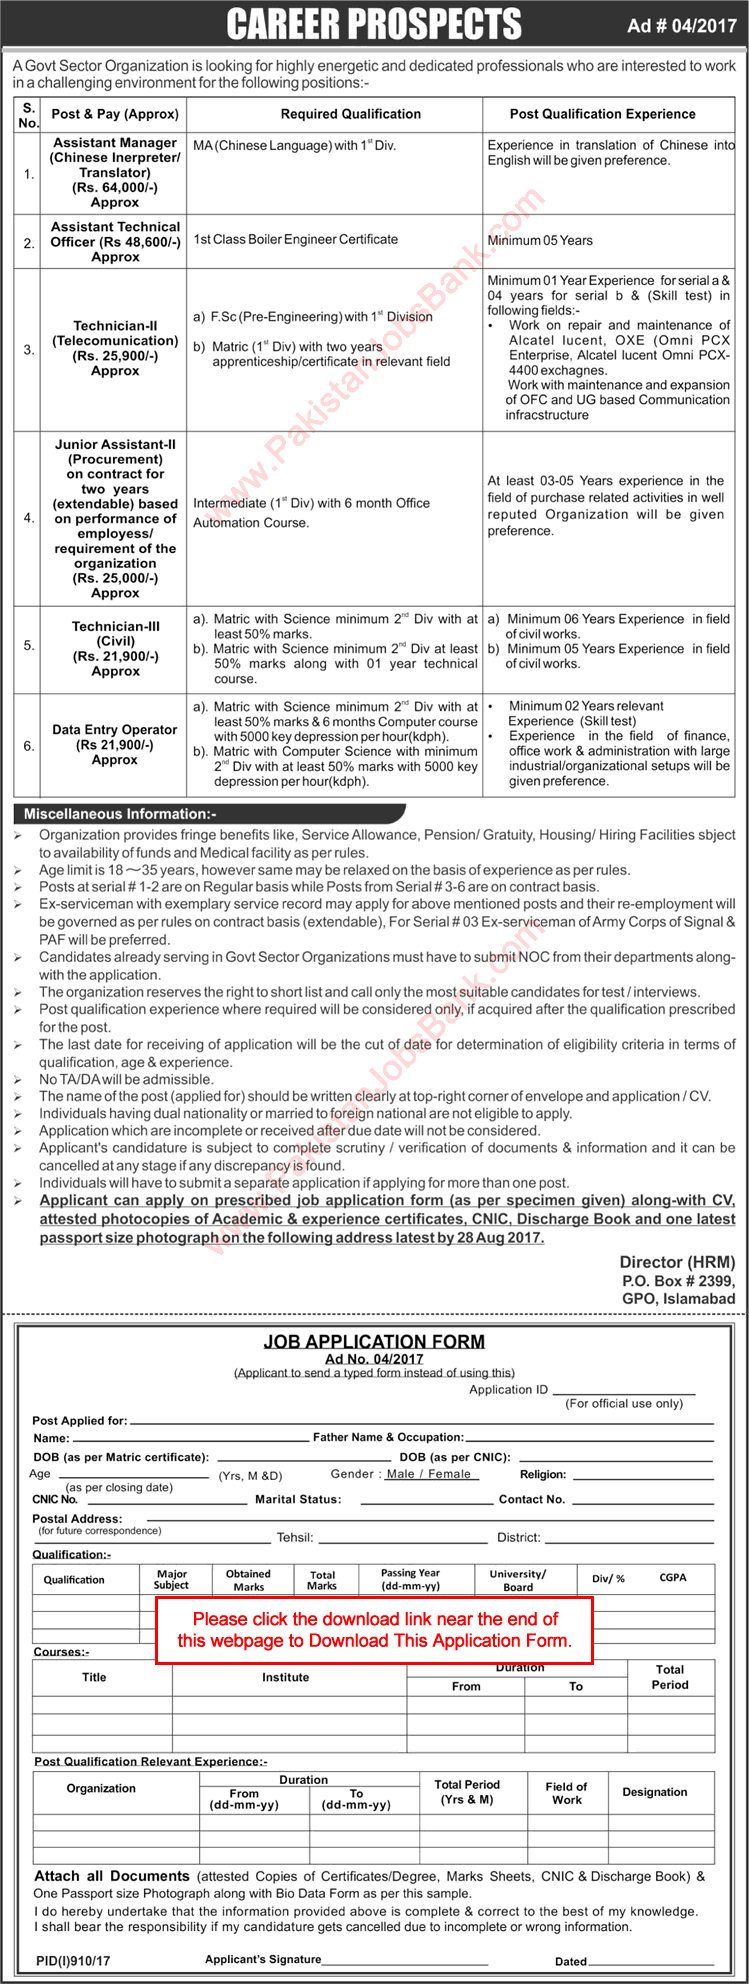 PO Box 2399 GPO Islamabad Jobs August 2017 Application Form NESCOM Technicians, DEO, Junior Assistant & Others Latest